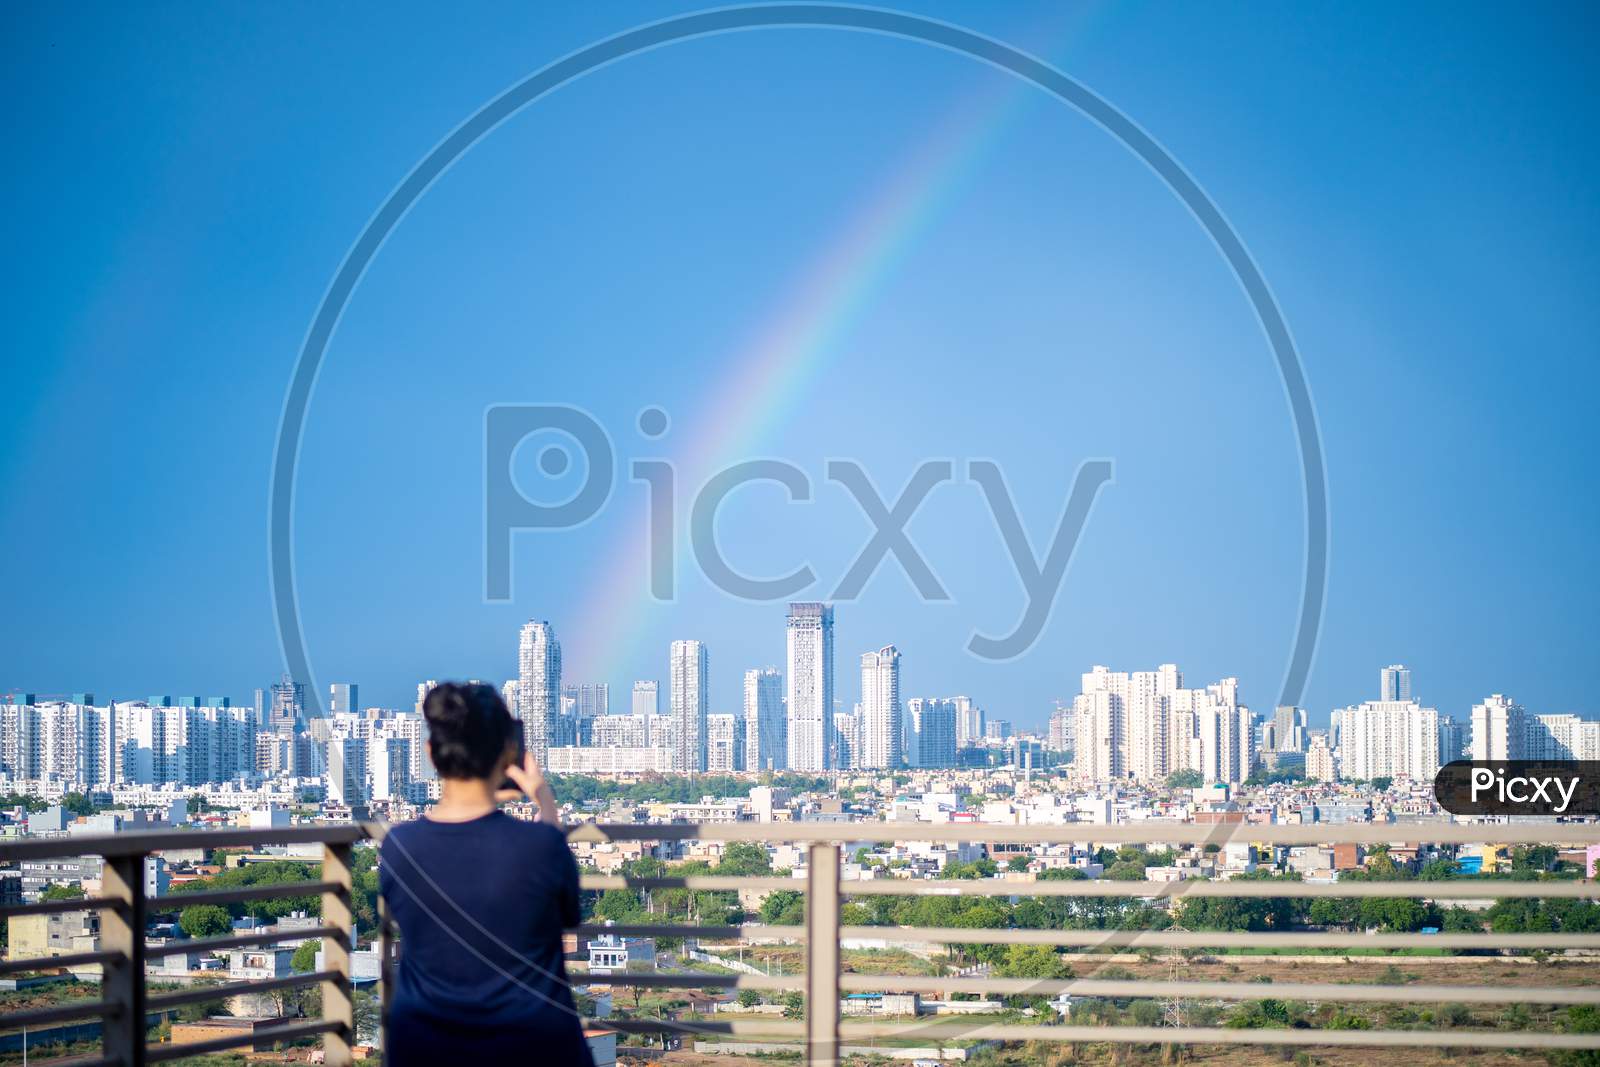 Young Indian Girl Wearing Hair In A Bun And With Blue Dress Photographing Rainbow Over Gurgaon Delhi Noida Cityscape On A Monsoon Day